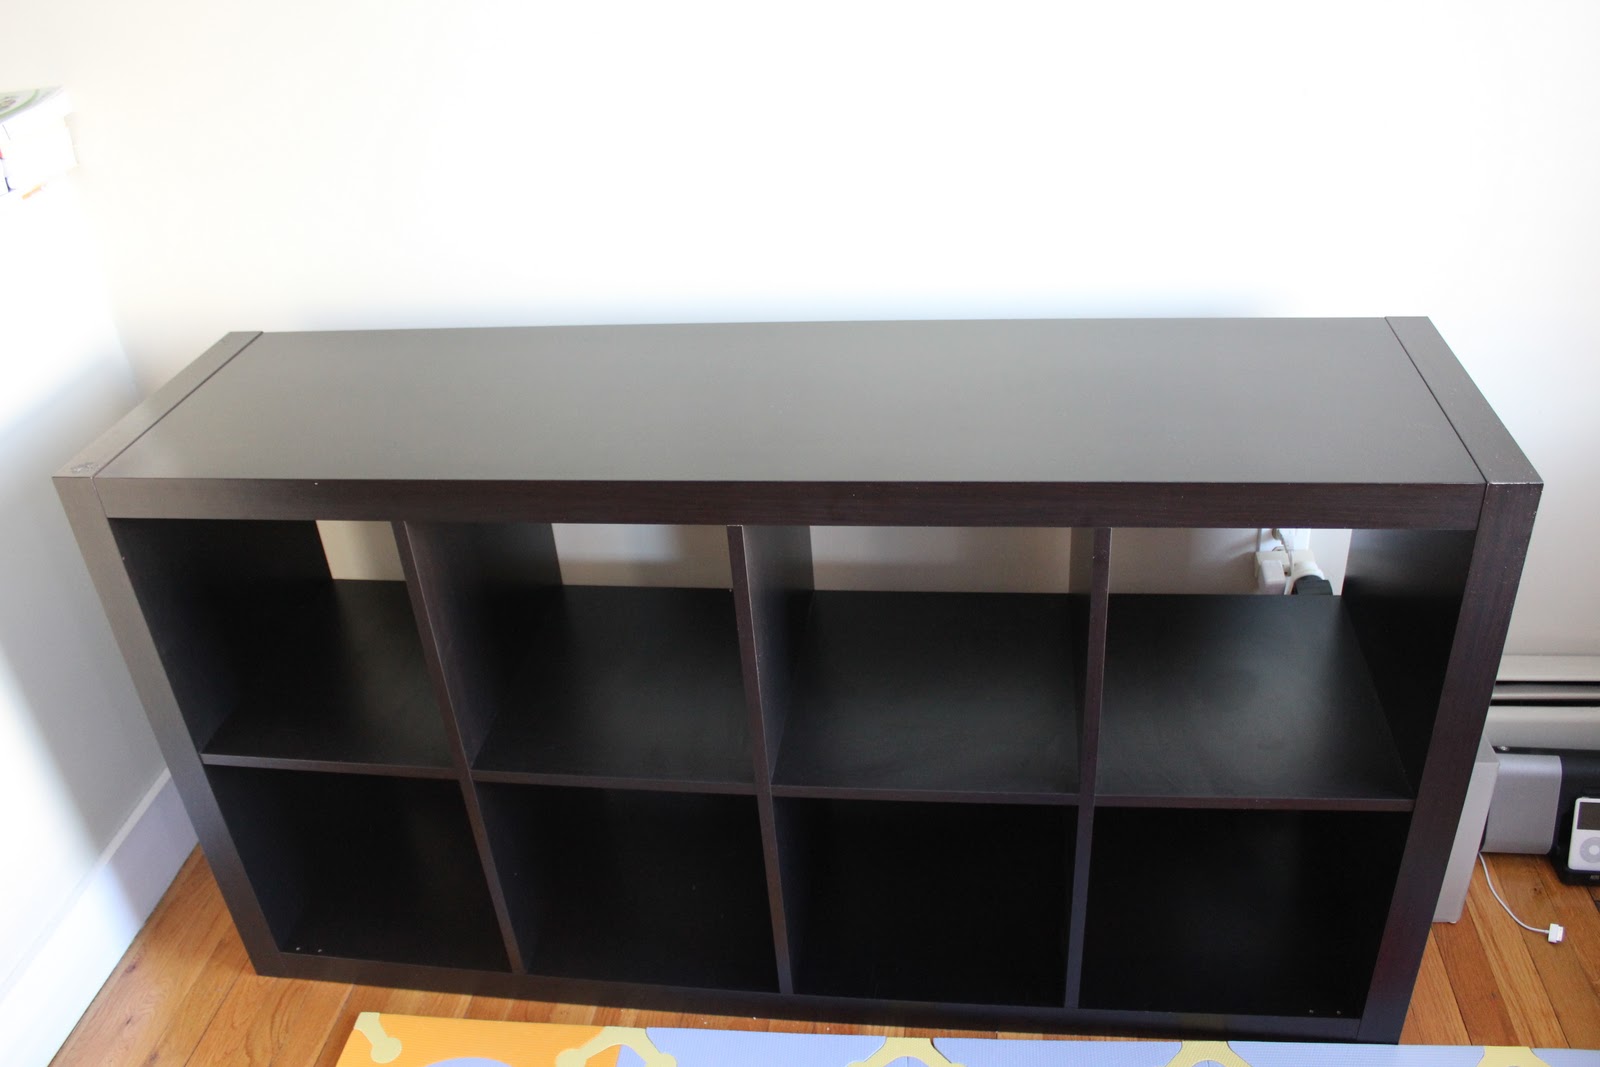 Moving Sale: IKEA Expedit bookcase: SOLD